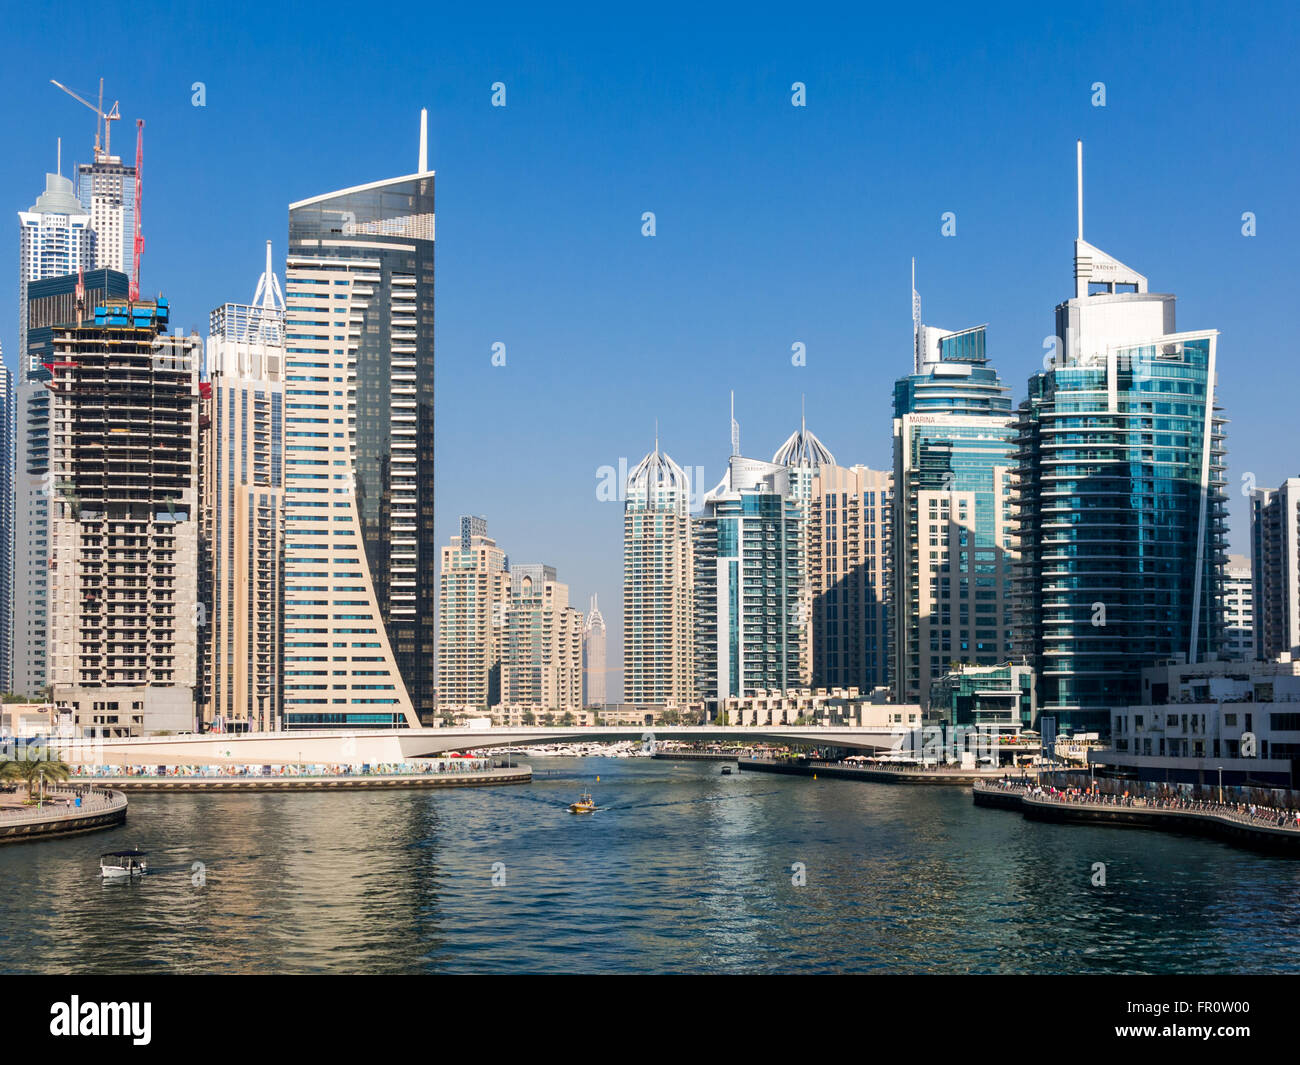 Highrise waterfront buildings, boats and bridge in the Marina district of Dubai, United Arab Emirates Stock Photo